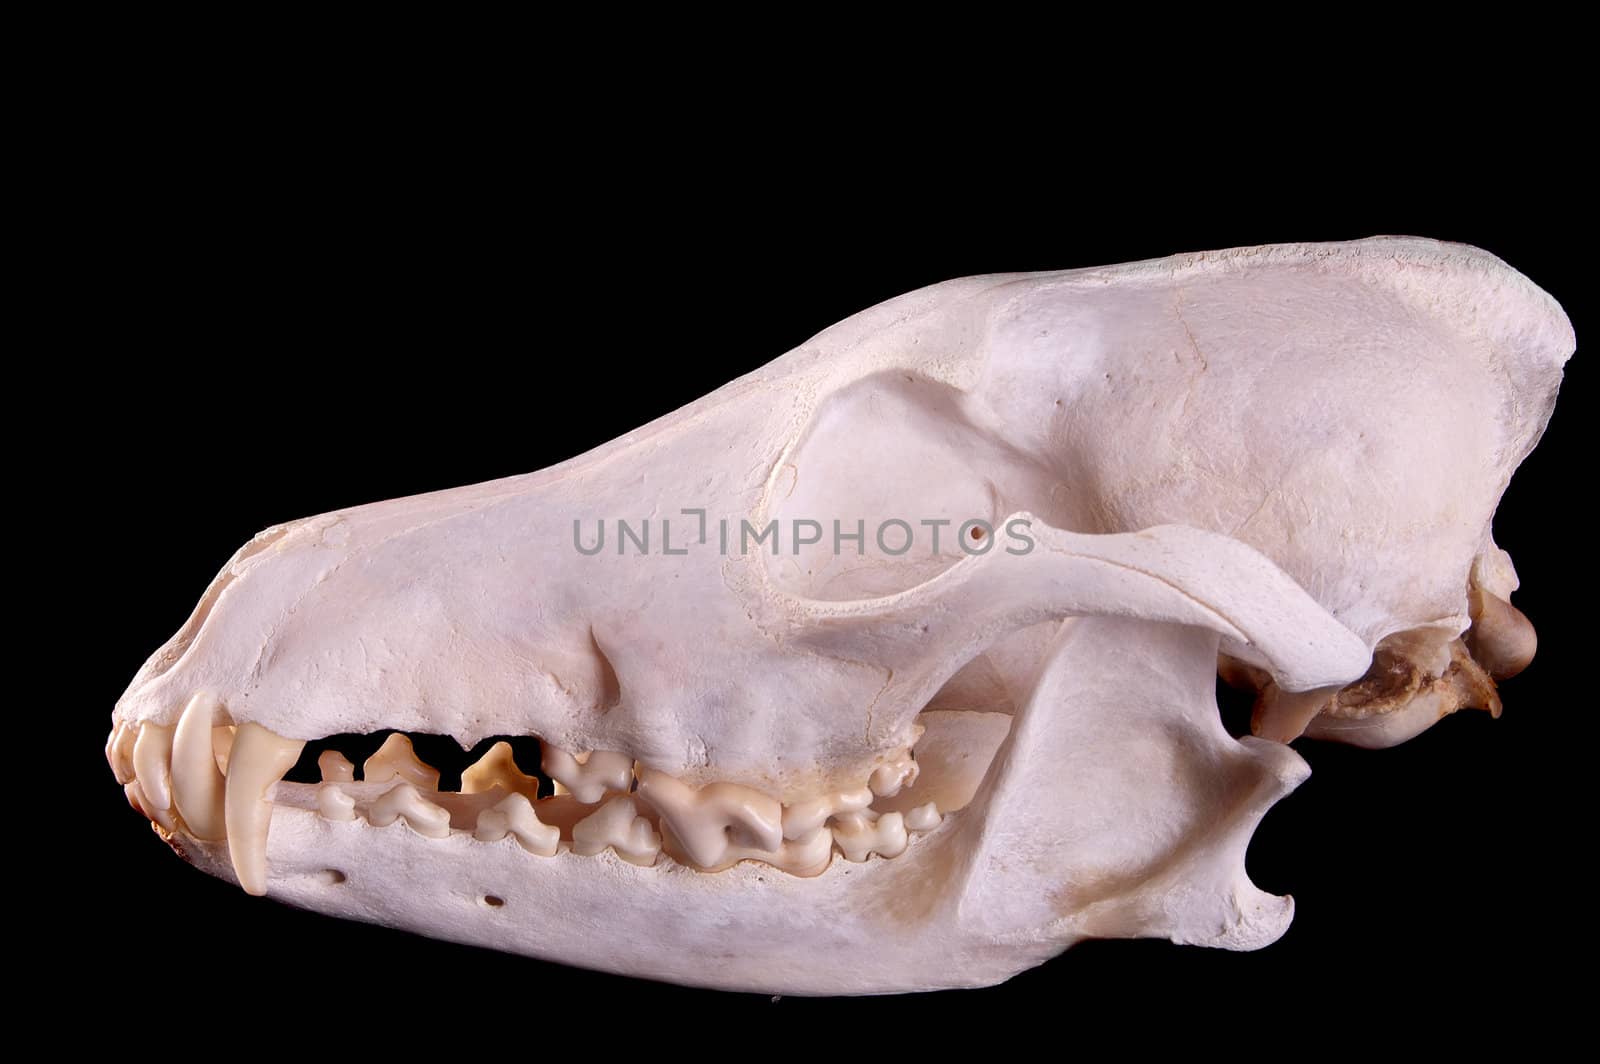 Skull of a coyote (canis Latrans) on a black background